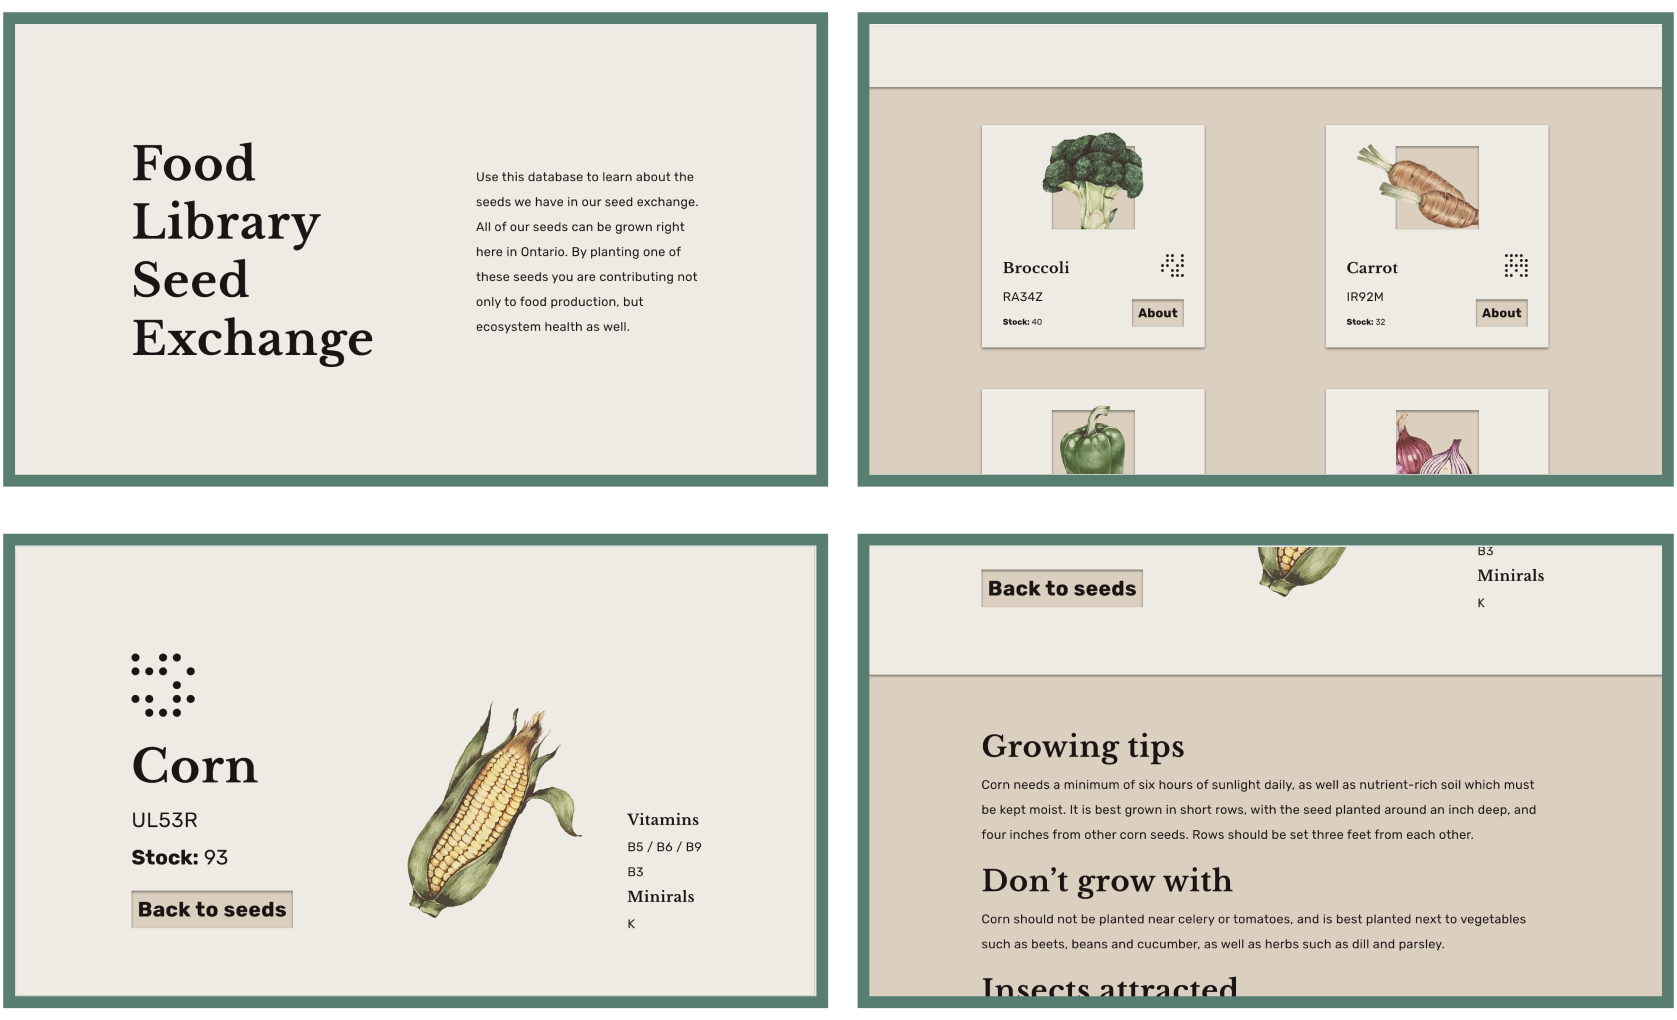 UI for the seed exchange